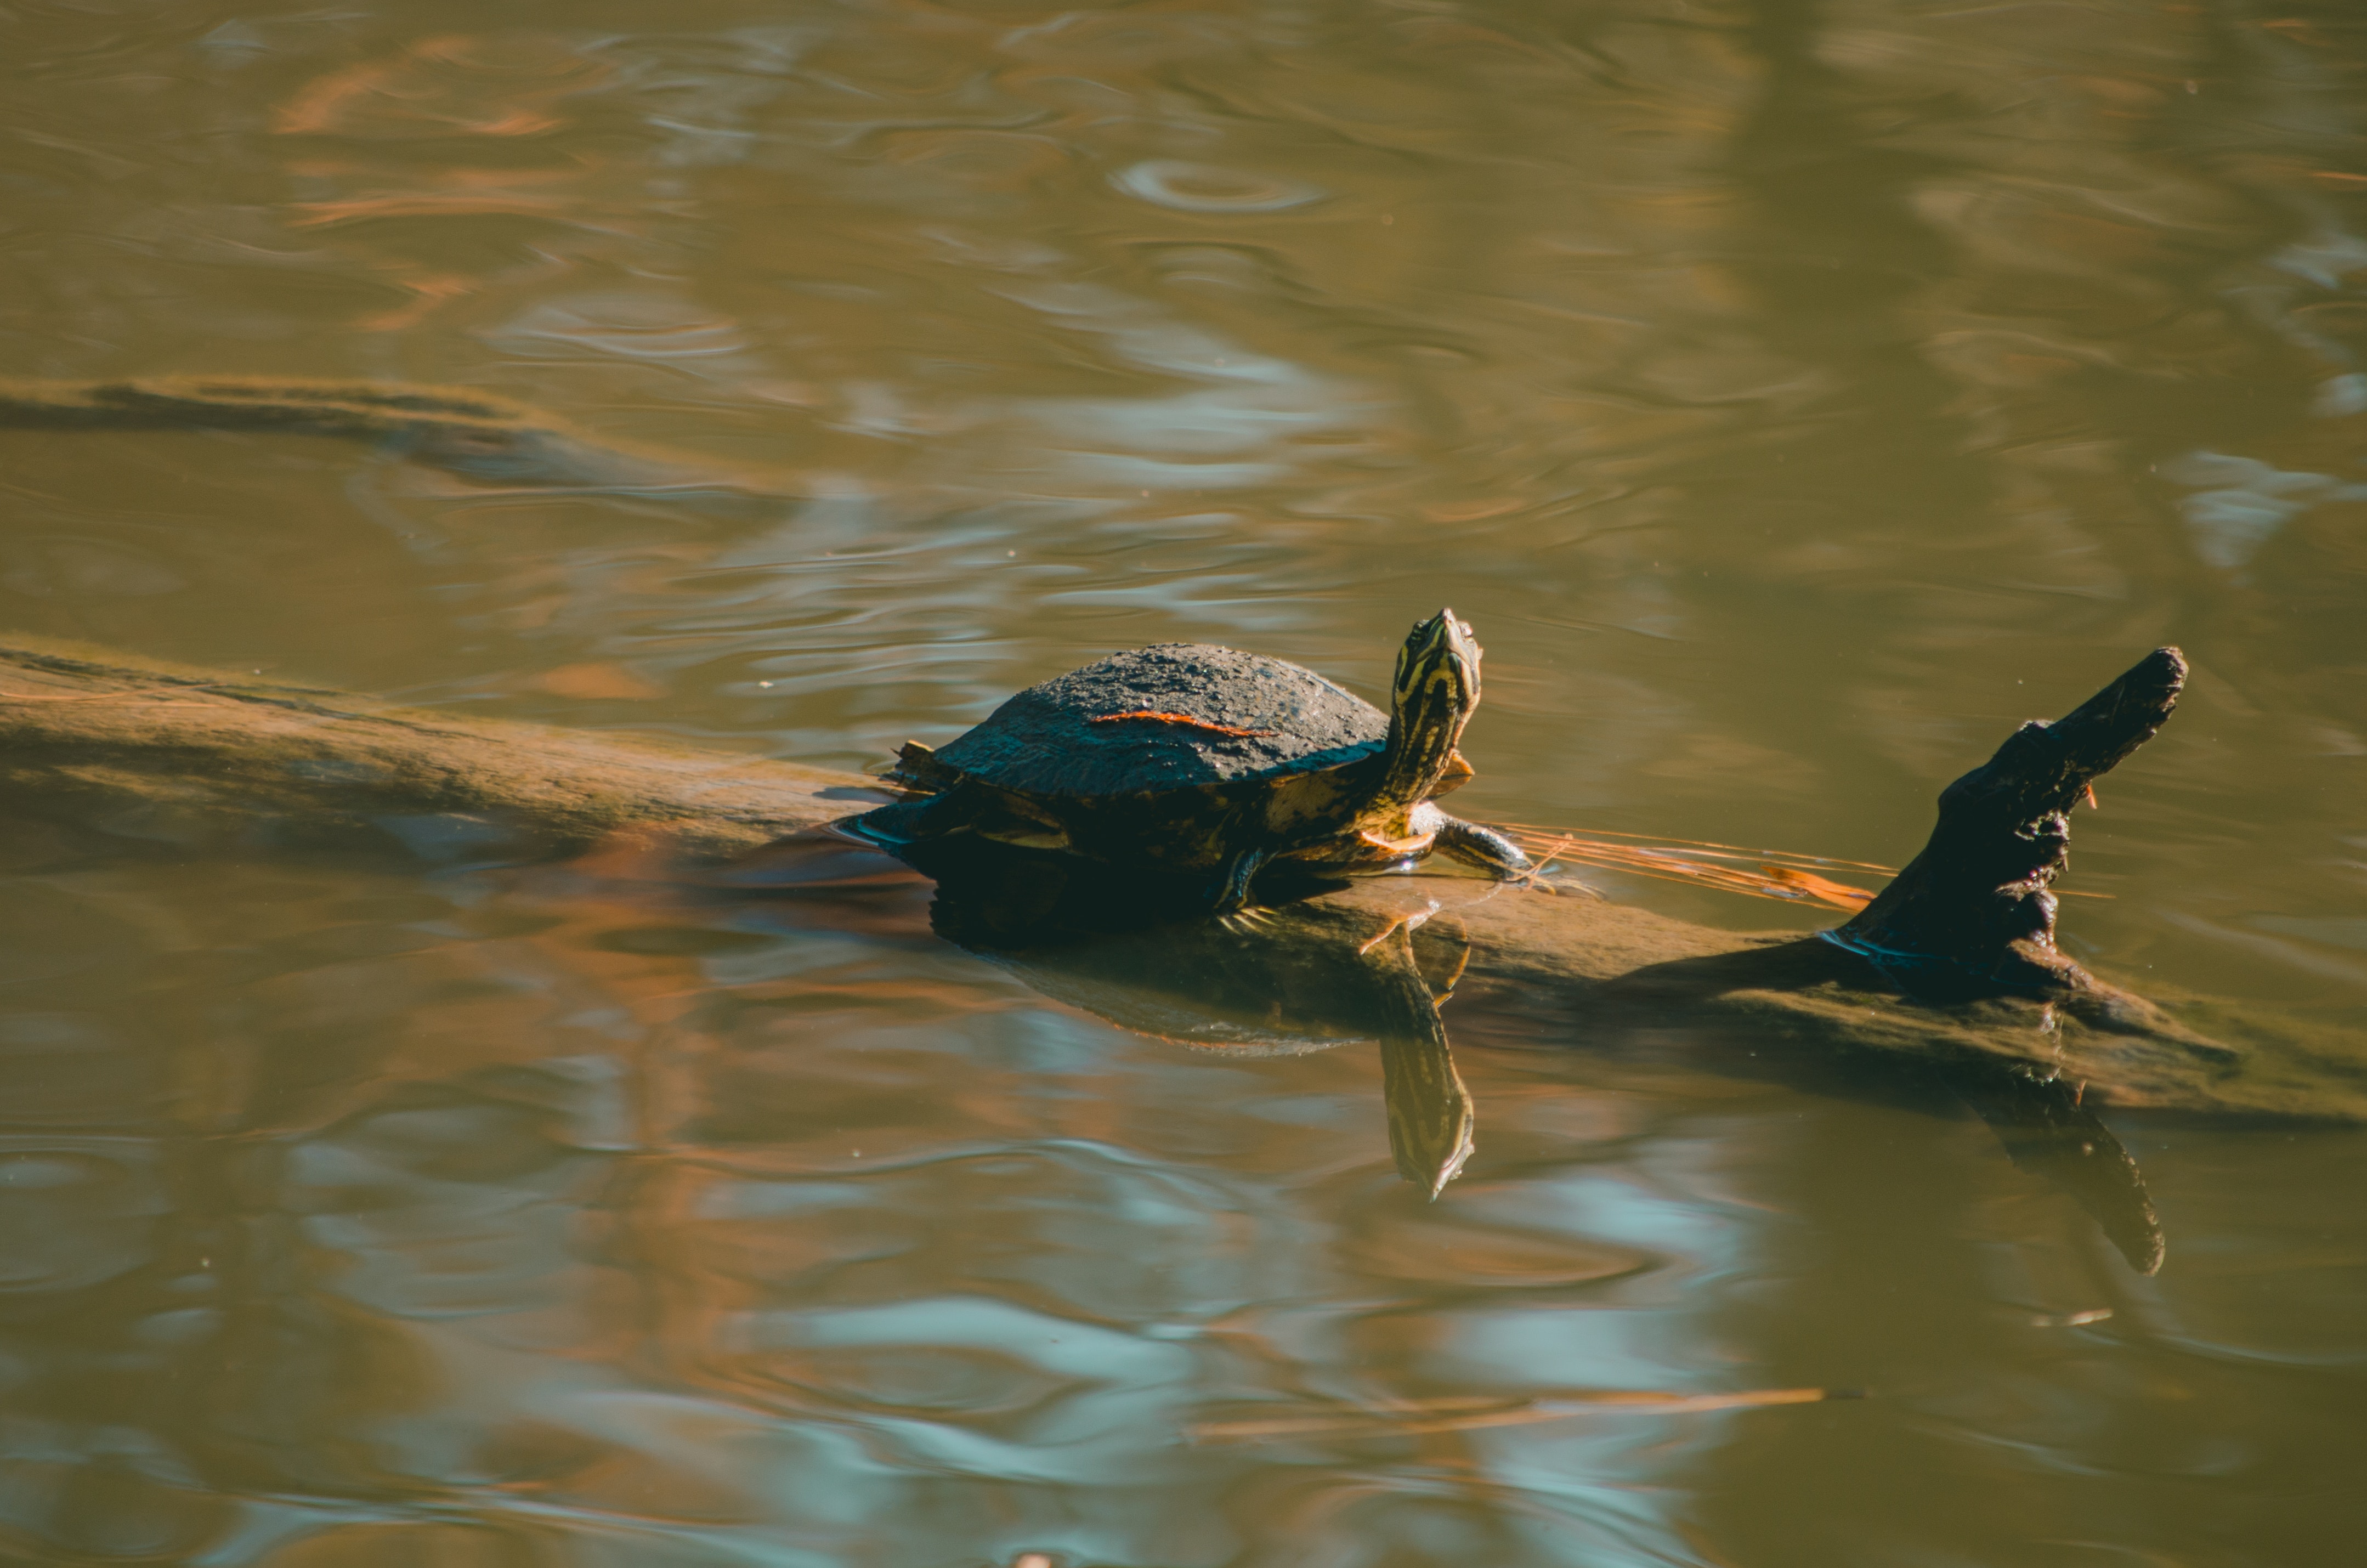 Brown turtle on wood trunk photo